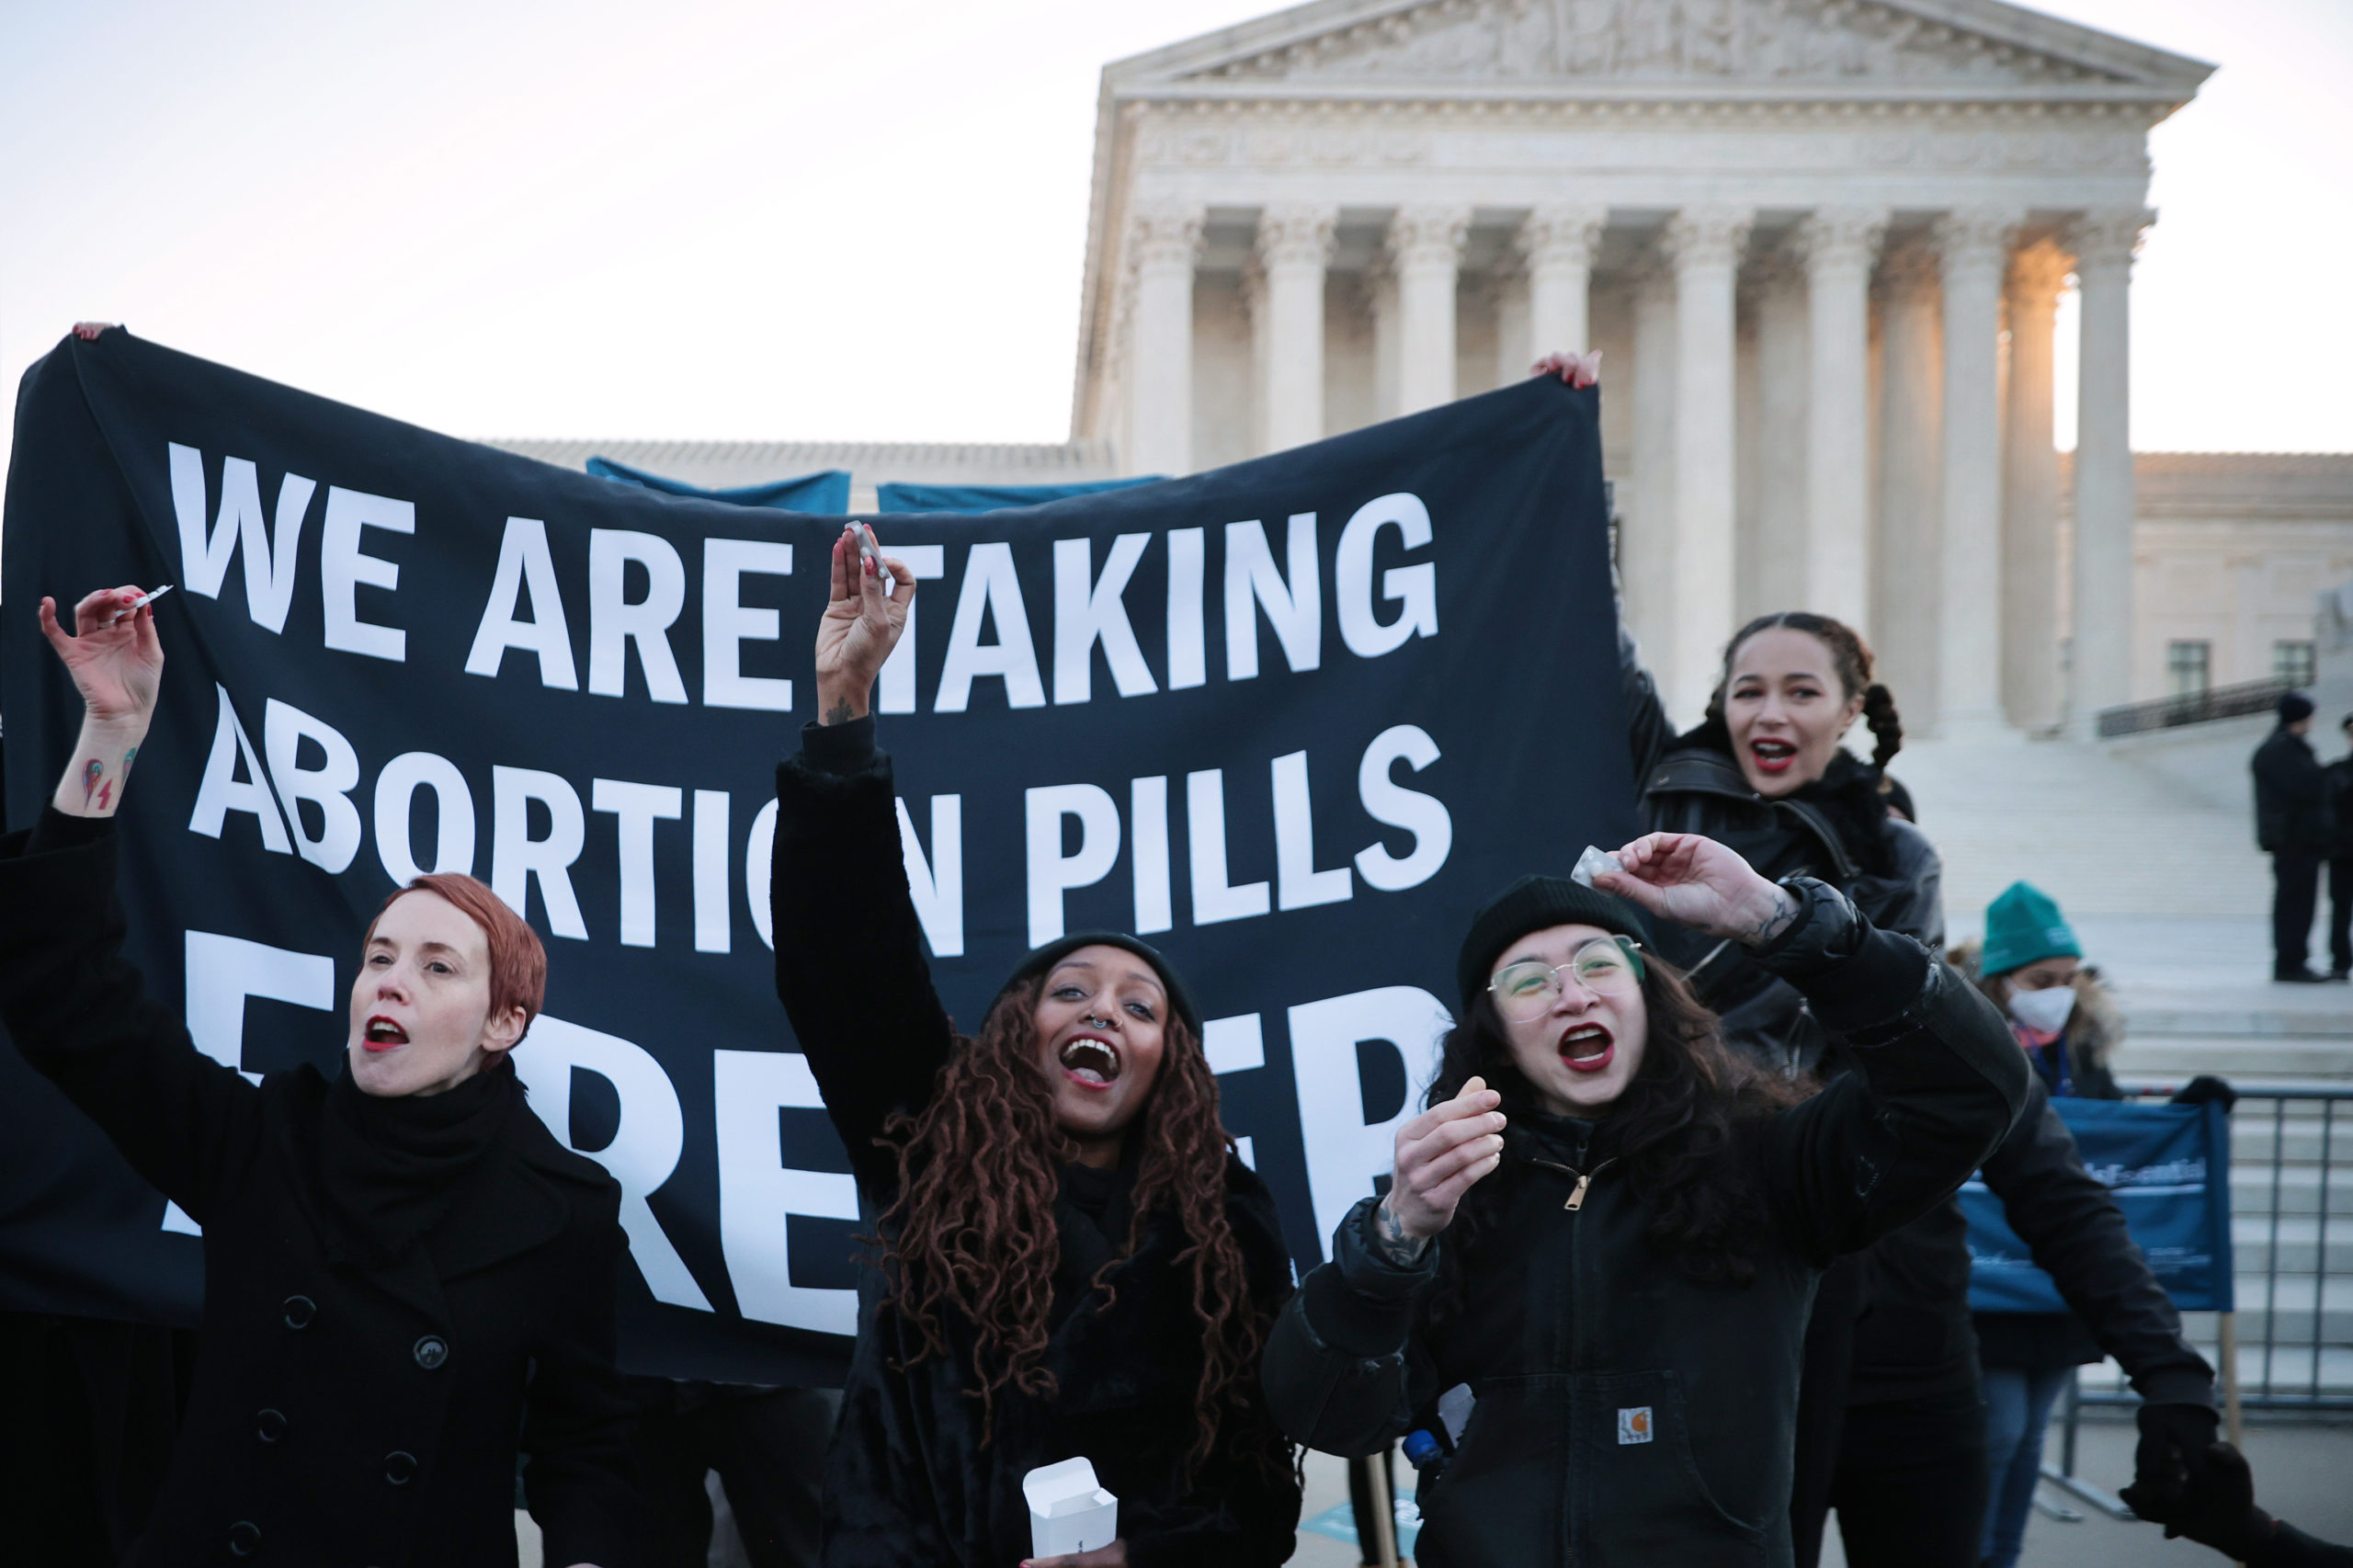 WASHINGTON, DC - DECEMBER 01: (L-R) Lila Bonow, Alana Edmondson and Aiyana Knauer prepare to take abortion pill while demonstrating in front of the U.S. Supreme Court as the justices hear hear arguments in Dobbs v. Jackson Women's Health, a case about a Mississippi law that bans most abortions after 15 weeks, on December 01, 2021 in Washington, DC. (Photo by Chip Somodevilla/Getty Images)